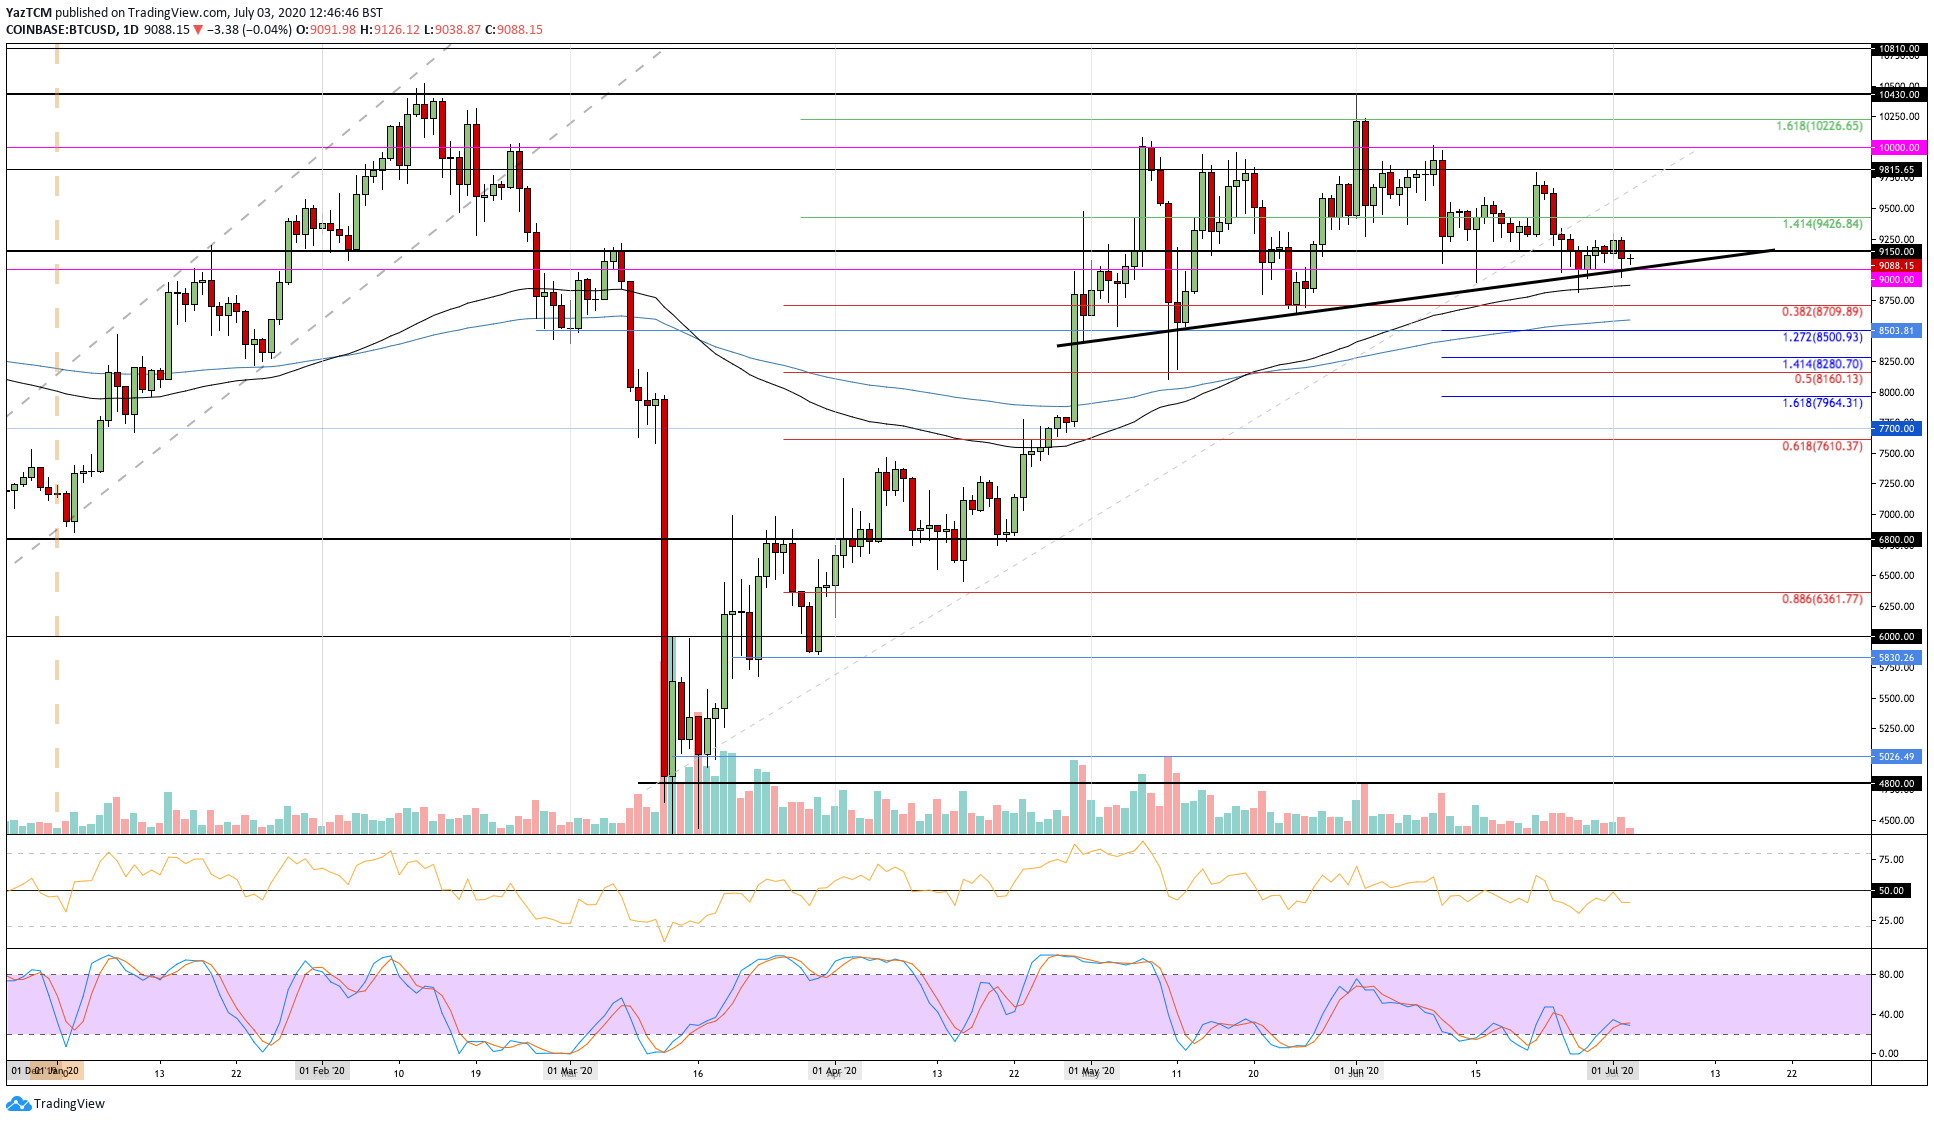 Crypto Price Analysis & Overview July 3: Bitcoin, Ethereum, Ripple, Kyber Network, and Bancor